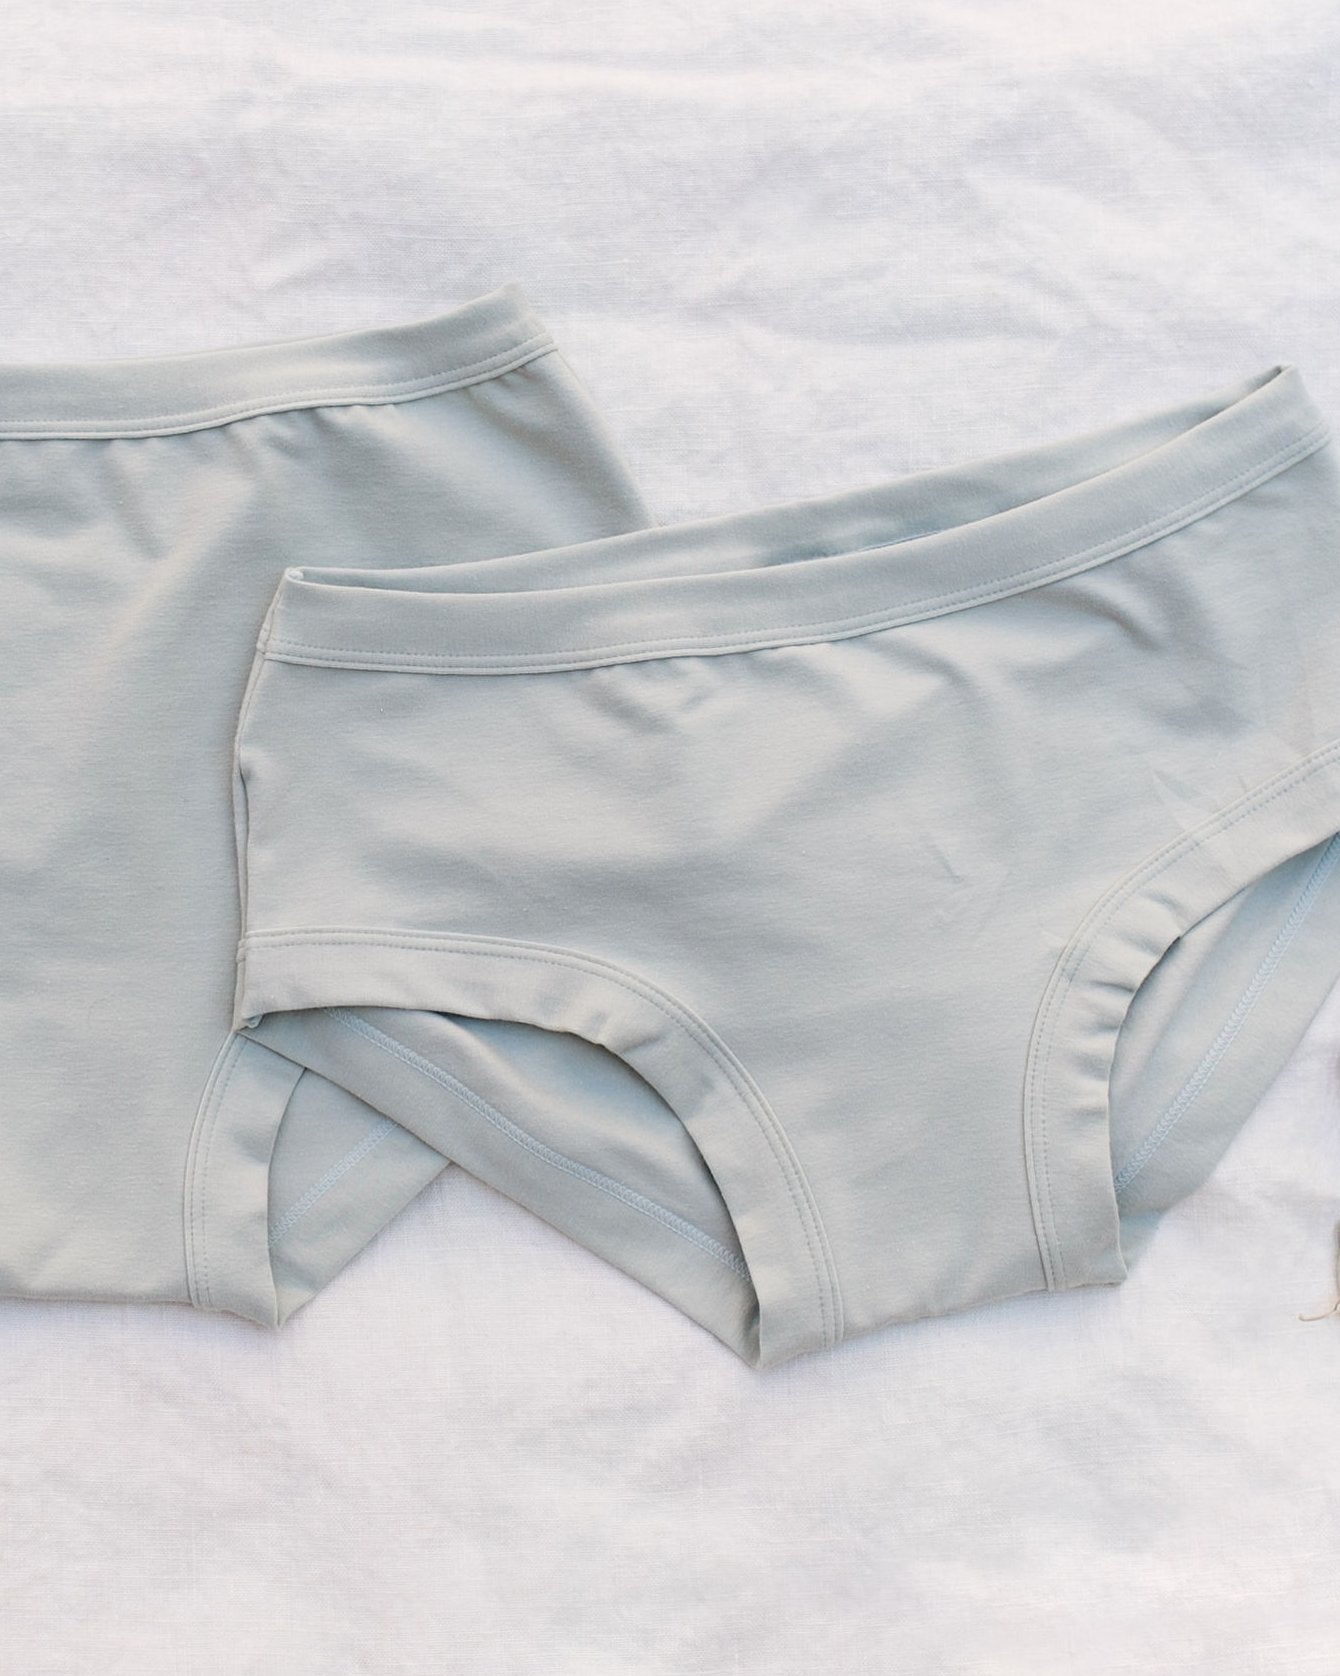 Thunderpants organic cotton Hipster style underwear in plain dried sage.